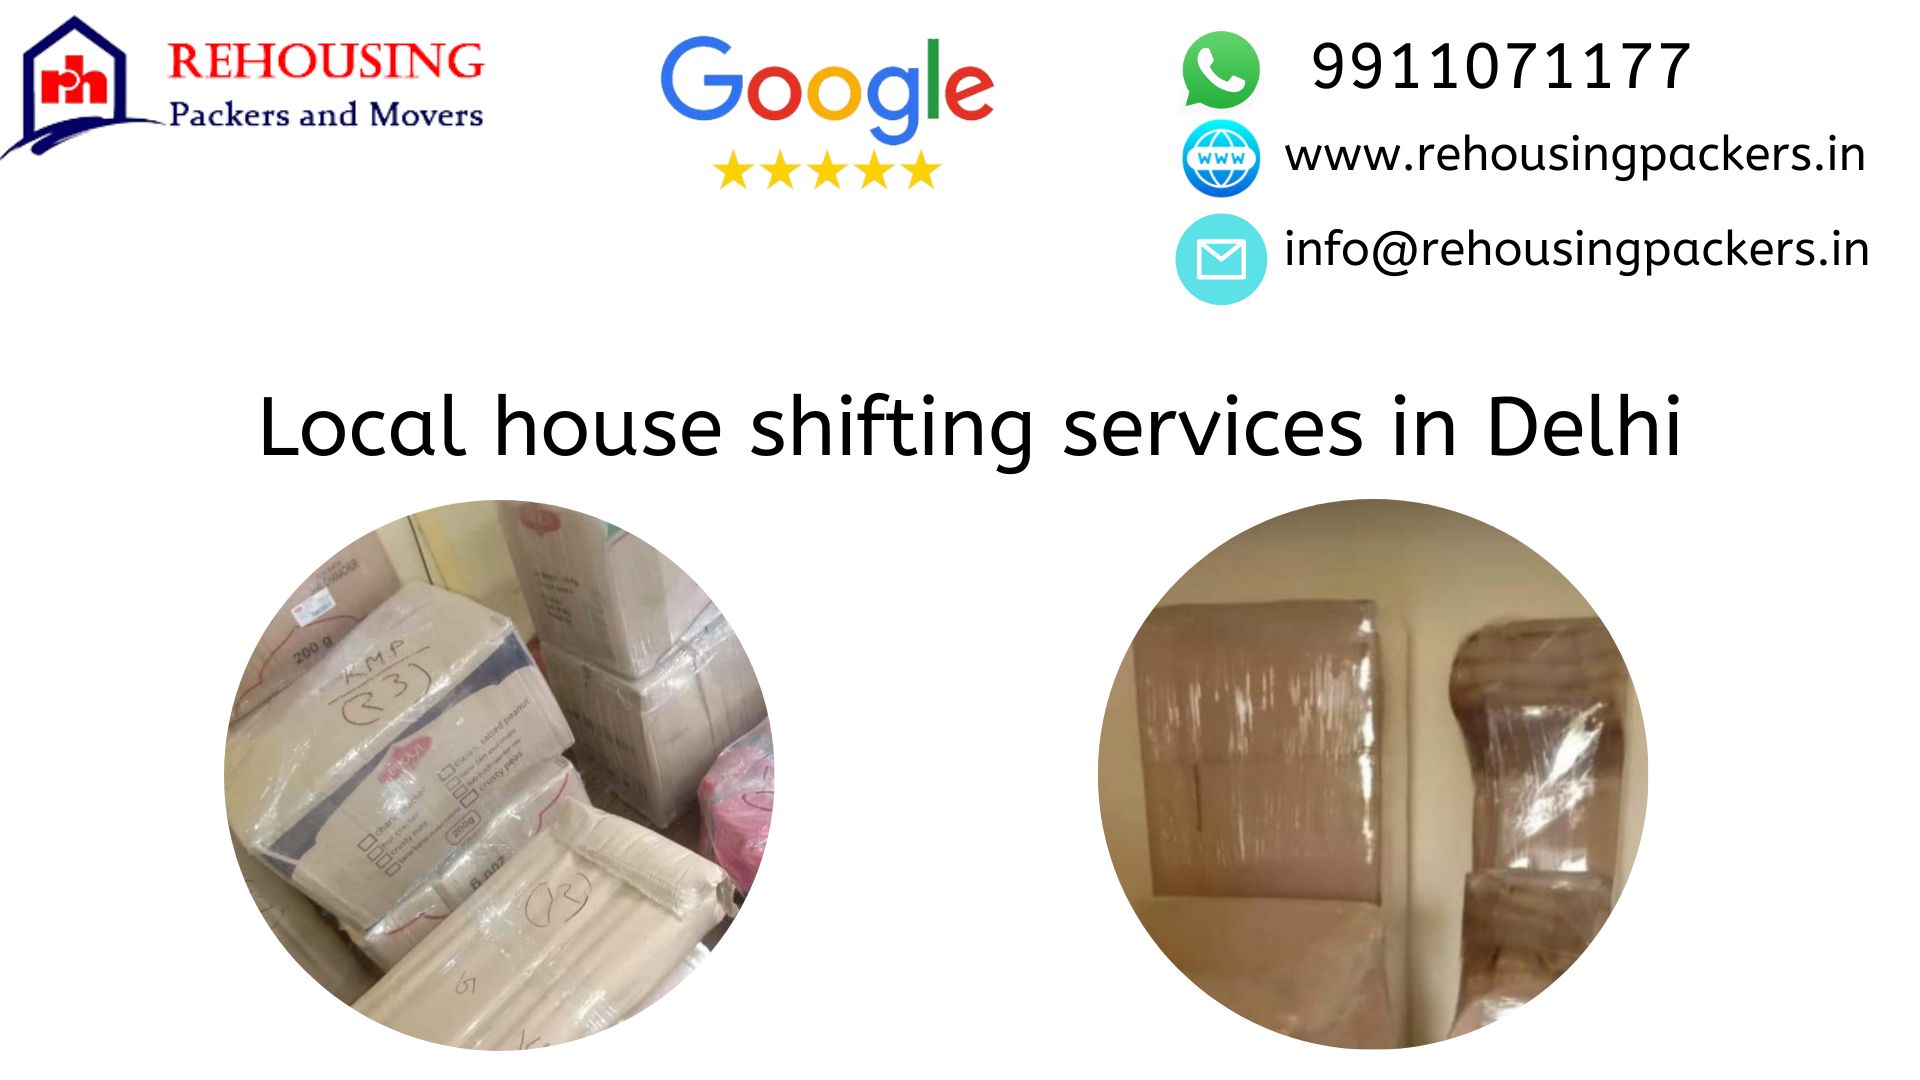 Local shifting services in Delhi | Rehousing packers